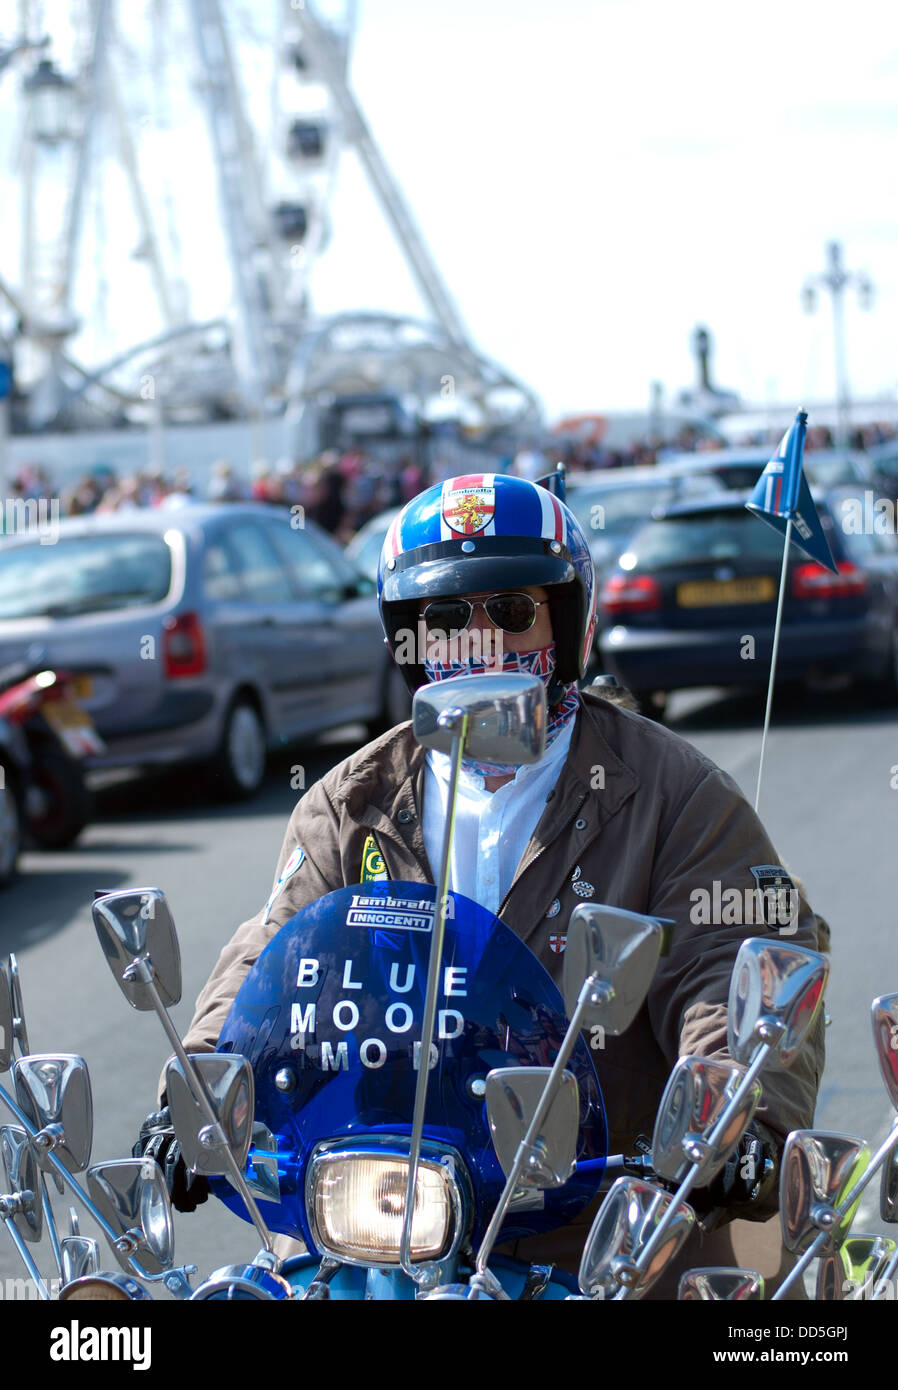 A Mod arriving at Brighton seafront. Stock Photo